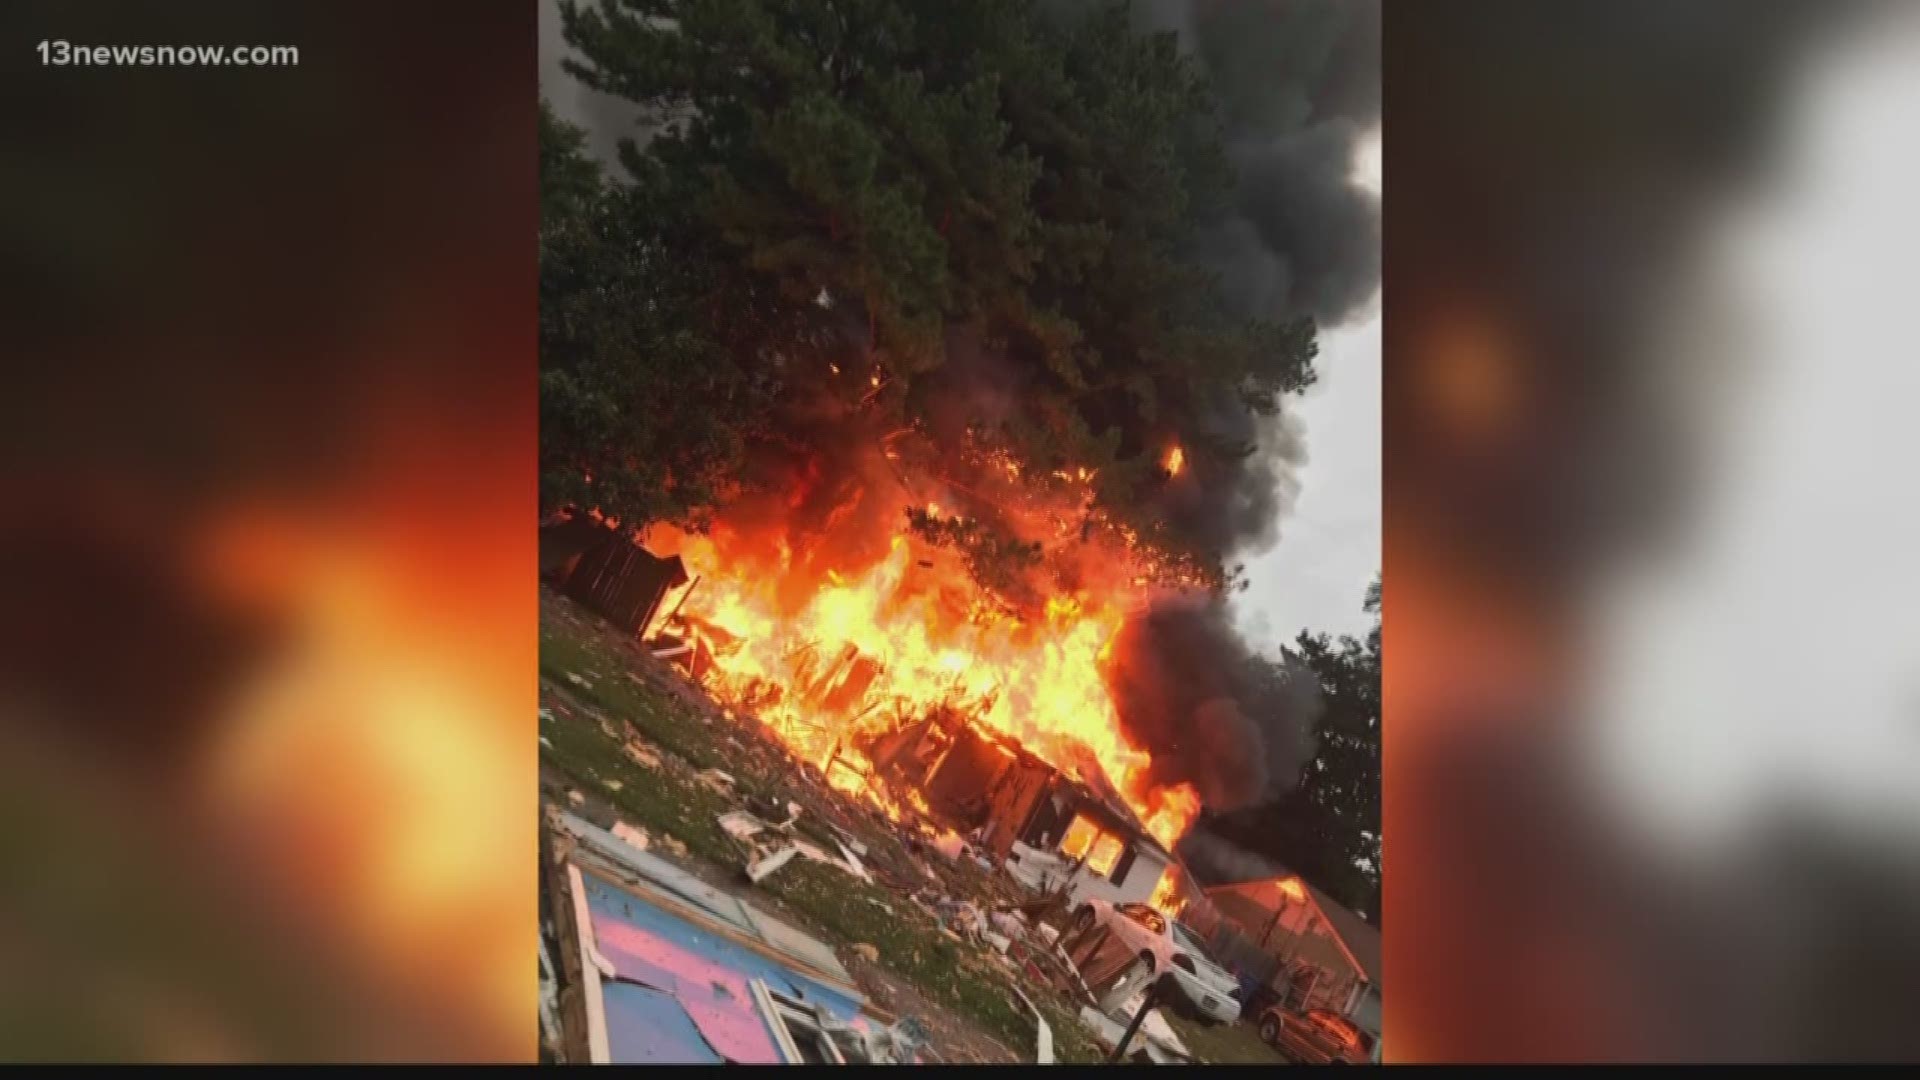 Explosion in Chesapeake injures several people and destroys house